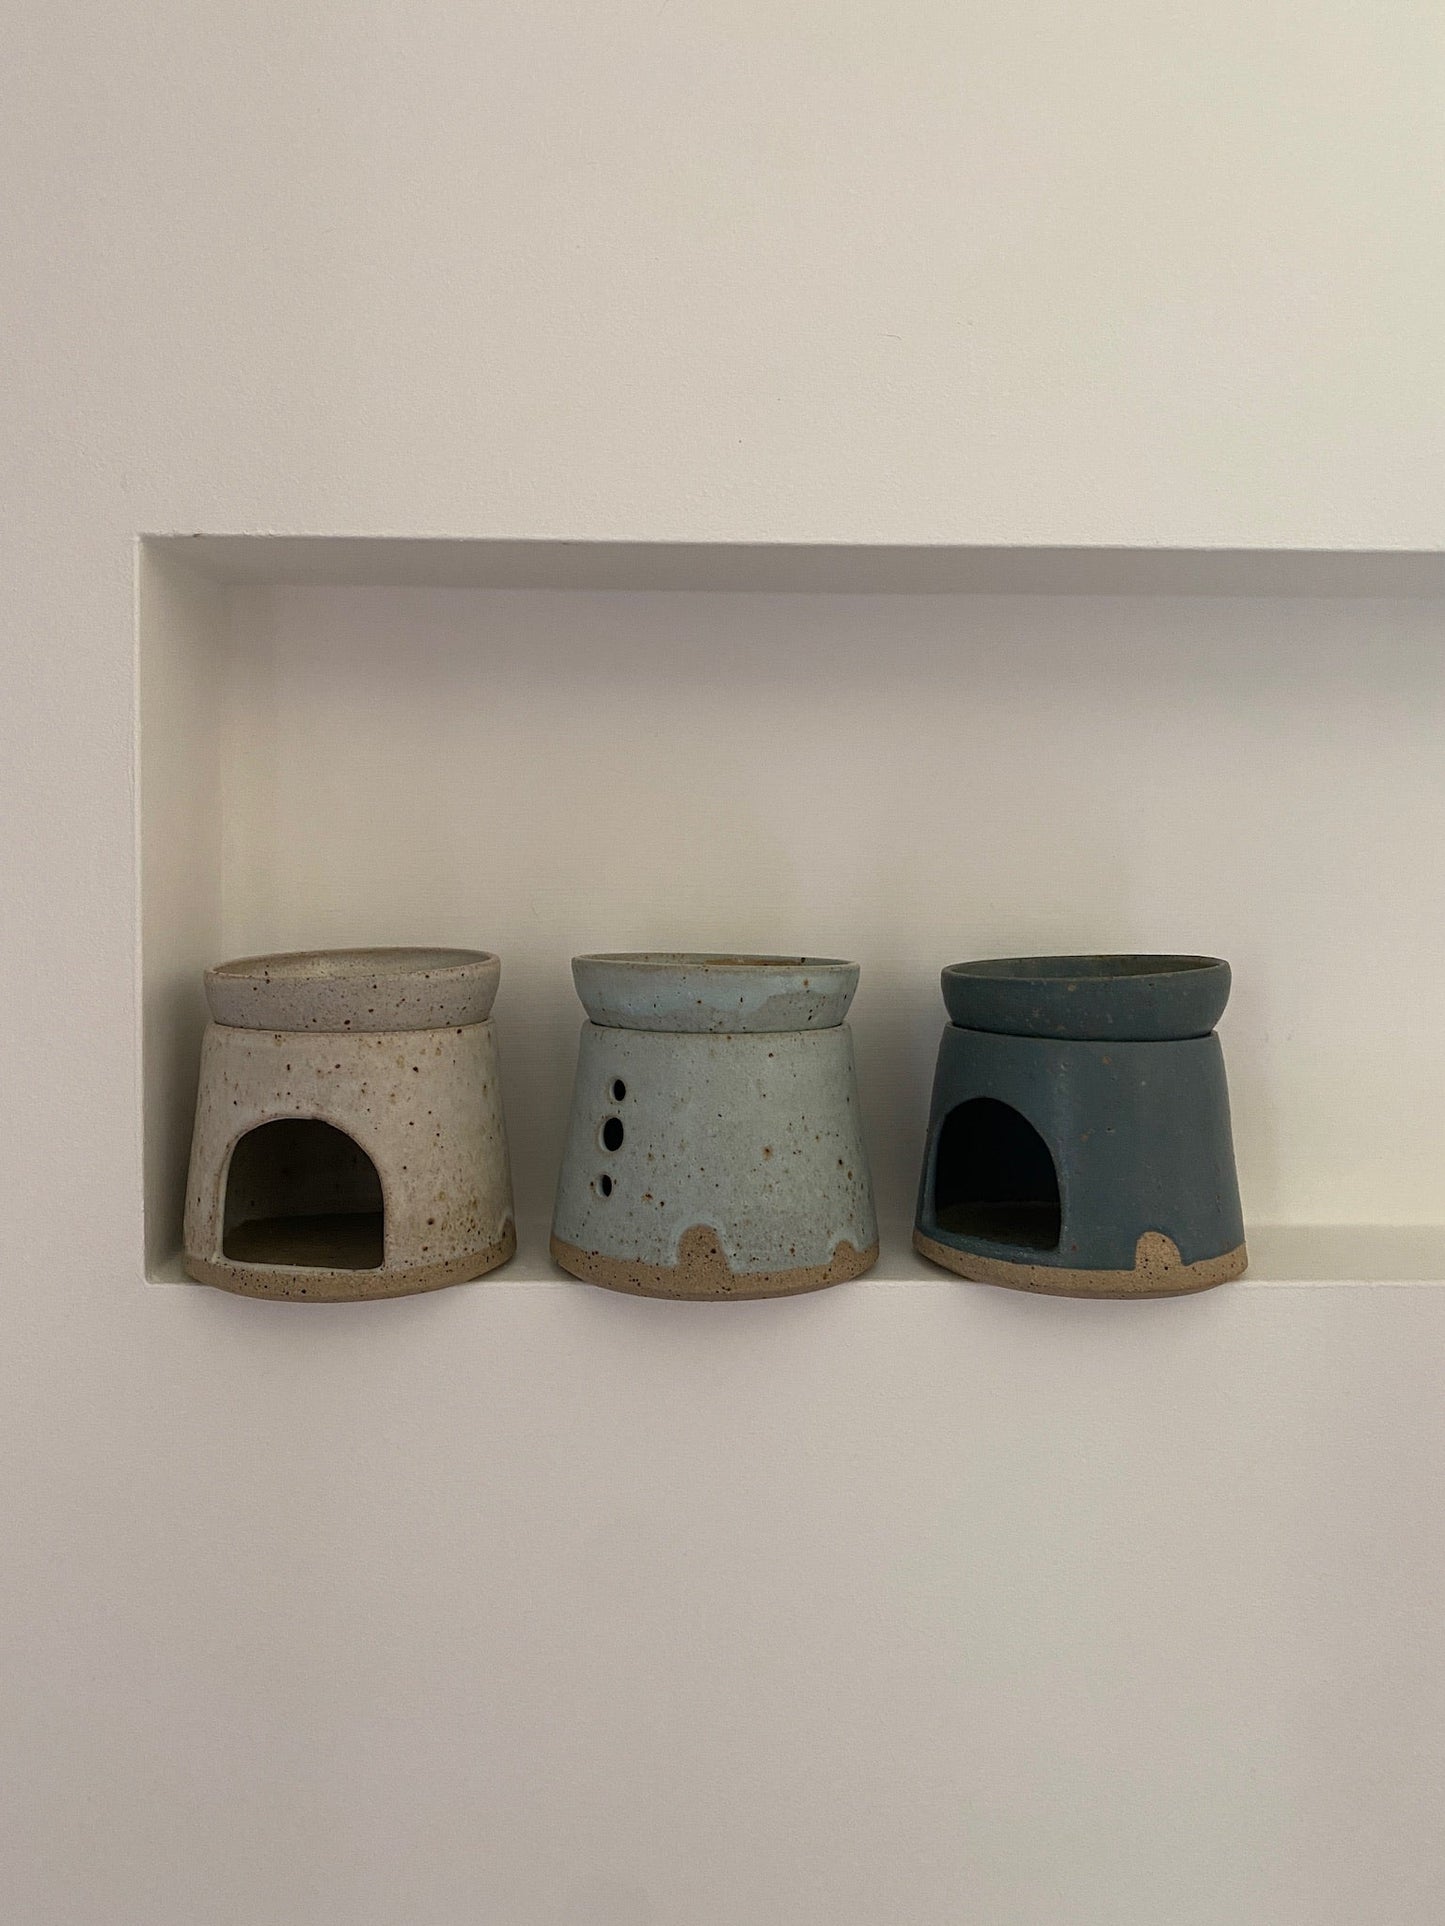 Selection of three glazes in the essential oil and oil burner gift set - the colours are ecru, light blue and teal